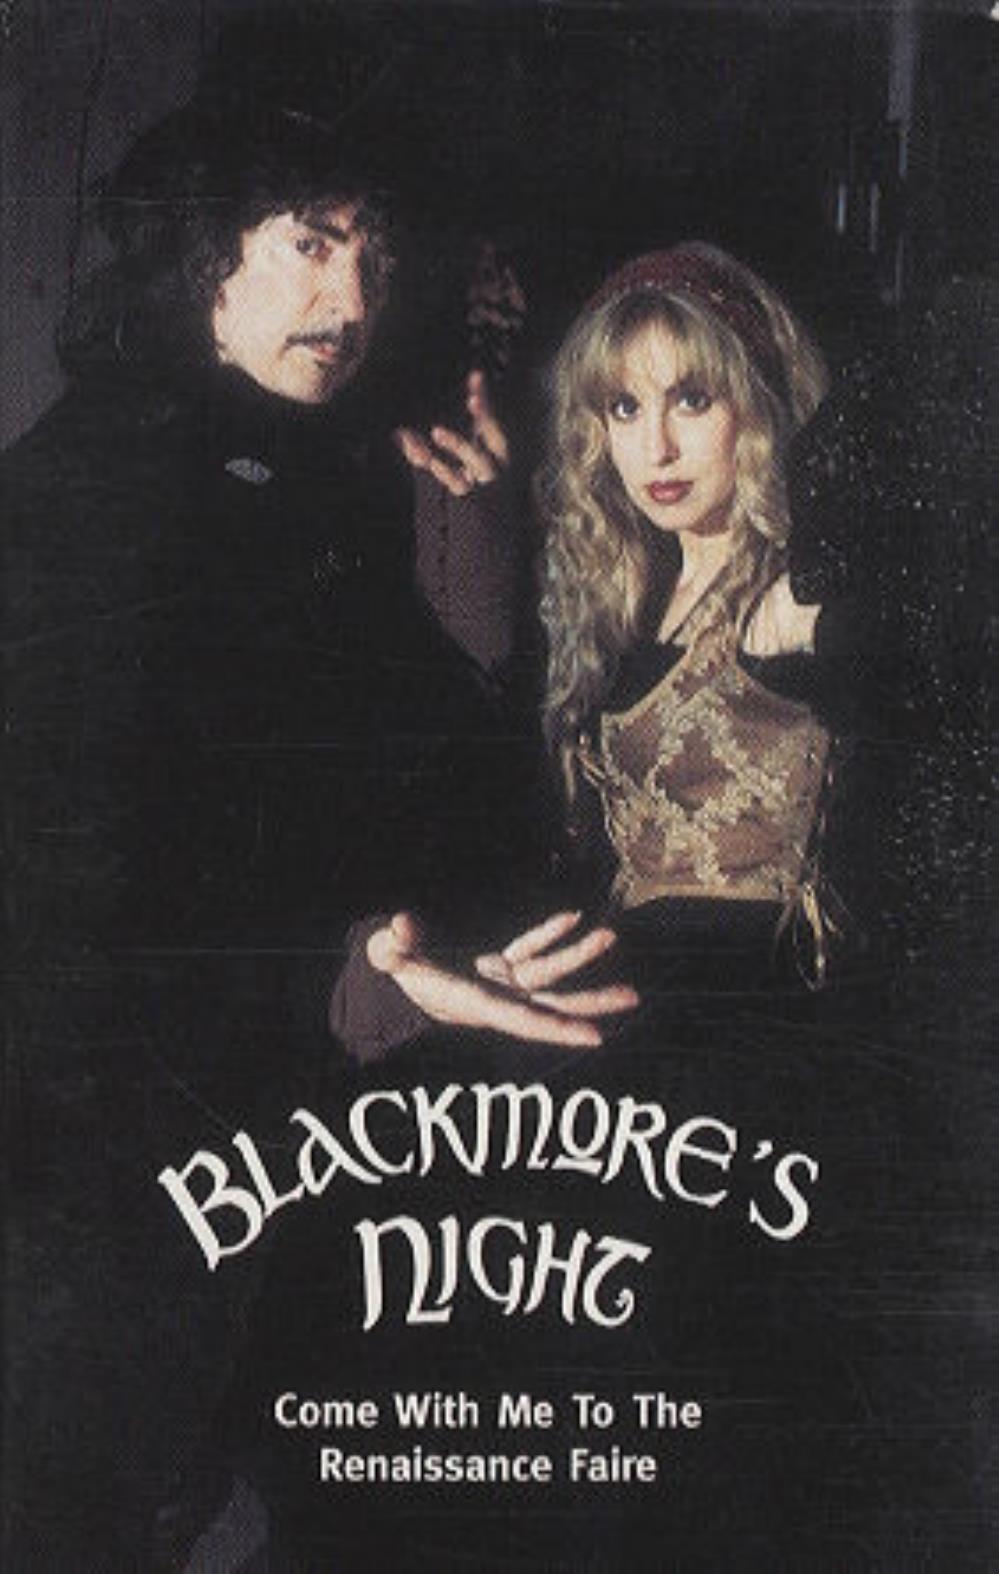 Blackmore's Night Come with Me to the Renaissance Faire album cover